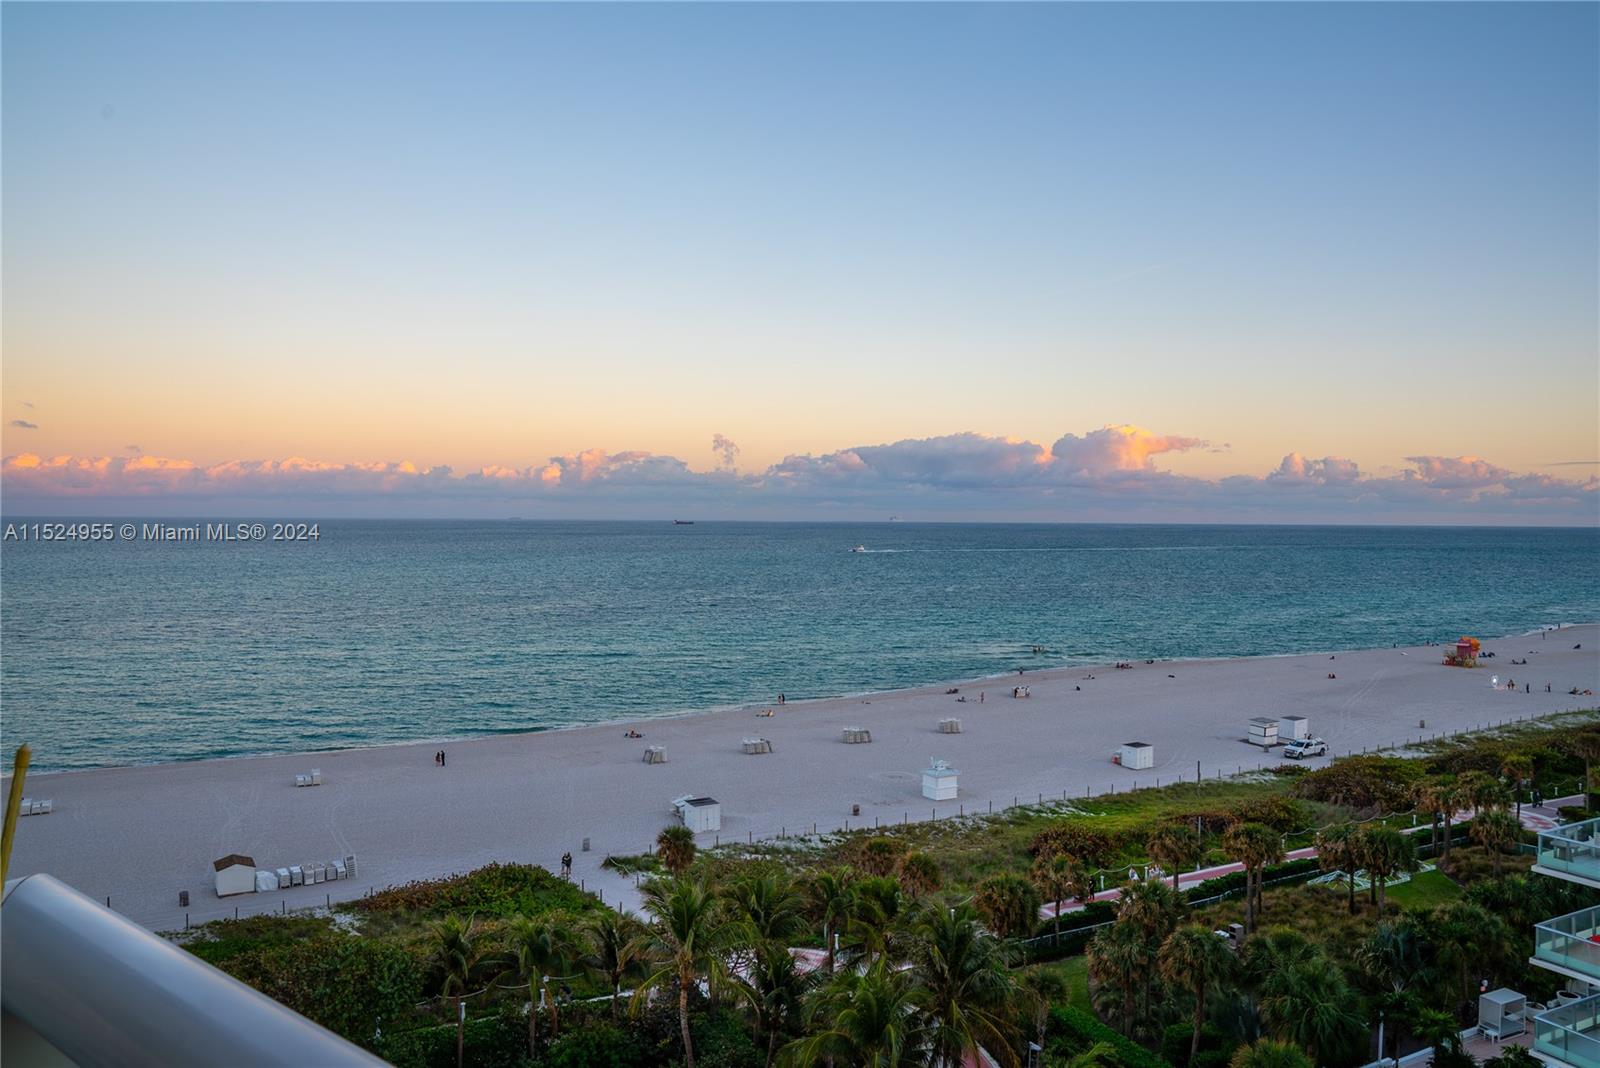 Can you hear the ocean calling? Move right in to this polished & renovated oceanfront residence at Mosaic on the beach! This spacious 2BD/2BA offers breathtaking ocean sunrise views and spectacular downtown sunsets. Enjoy a balcony overlooking the beach, private foyer entry, a fantastic flow-through floor-plan, impact windows & doors, an open white & light kitchen w/ island, new Subzero & Wolf appliances, & washer/dryer. The primary suite boasts a private balcony with additional ocean views, & a gorgeous bathroom w/ dual sinks & separate tub & shower. 1 assigned parking + valet. Live with the ocean at your doorstep! Amenities: oceanfront infinity pool, movie & party room, hot tub & a fitness center. Free valet parking for guests! CAN BE RENTED 4X/YEAR! EARN EXTRA INCOME! MOTIVATED SELLER!